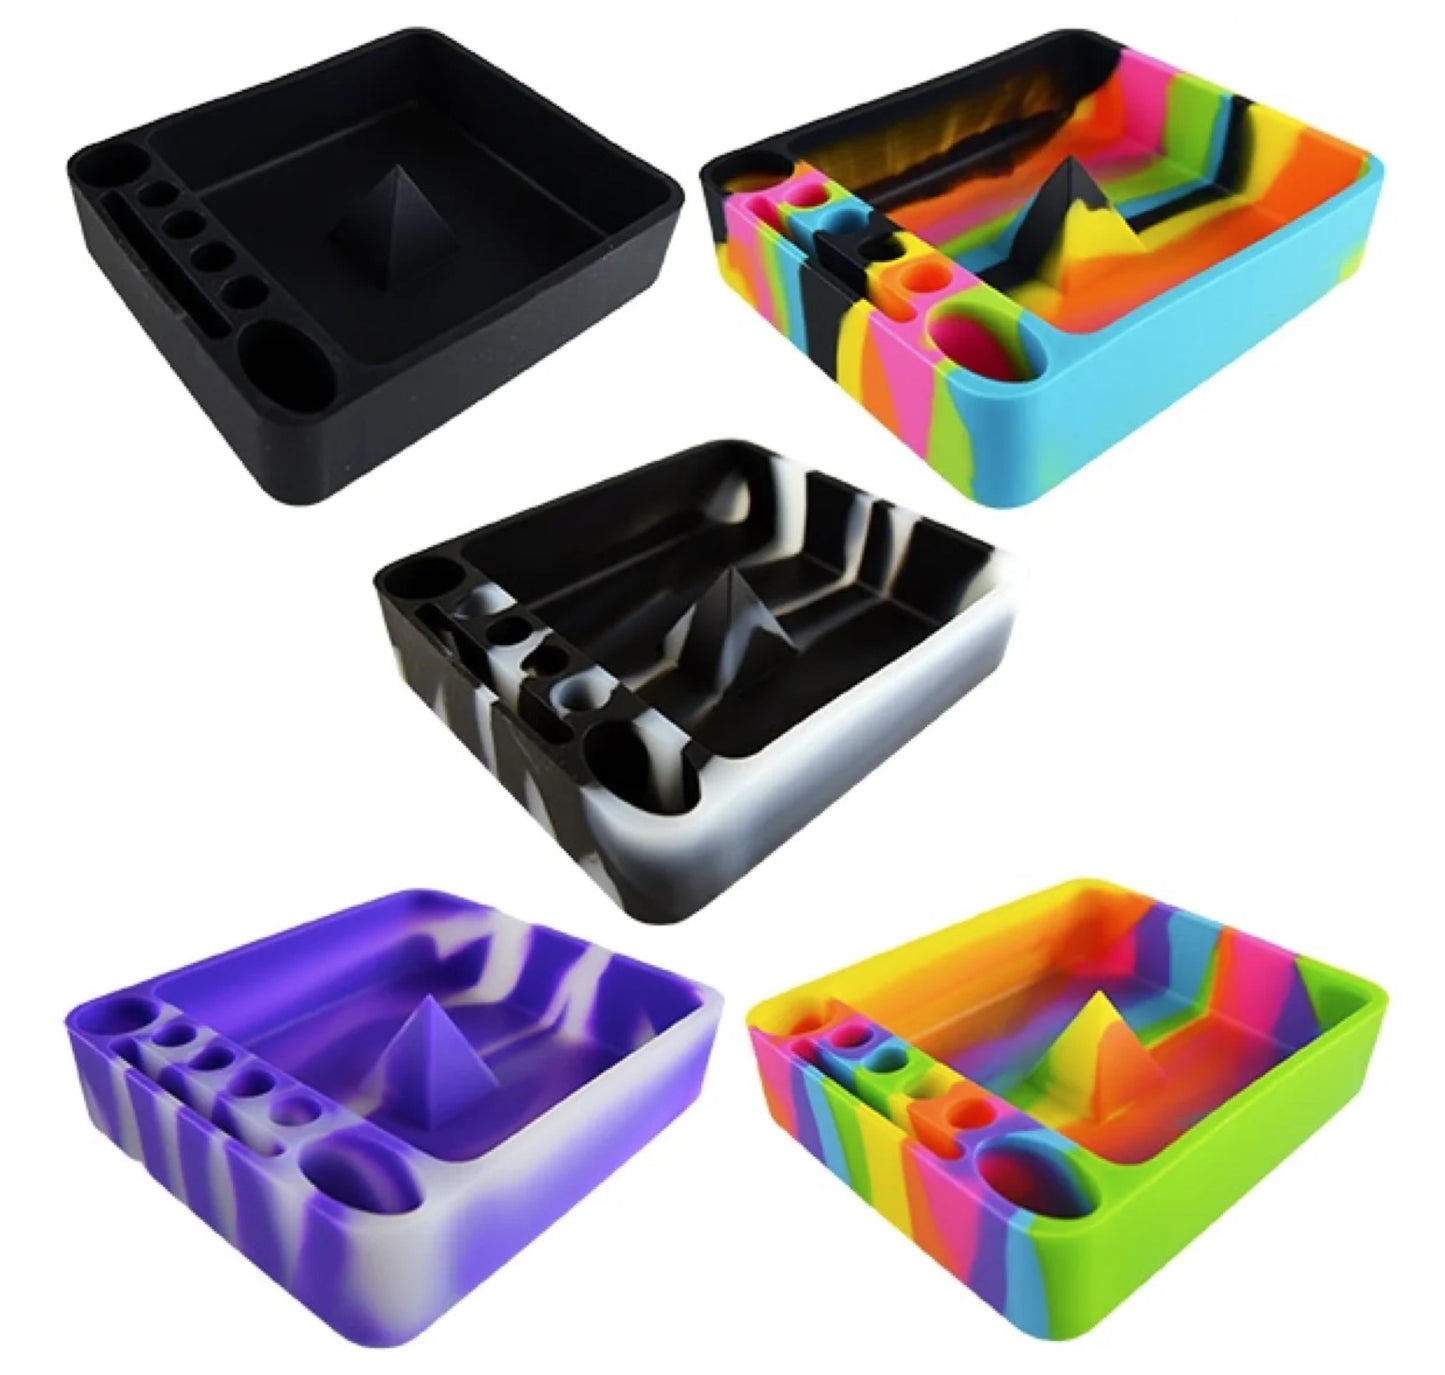 ITEM NUMBER 040957 SILICONE PYRAMID ASHTRAY 6 PIECES PER DISPLAY